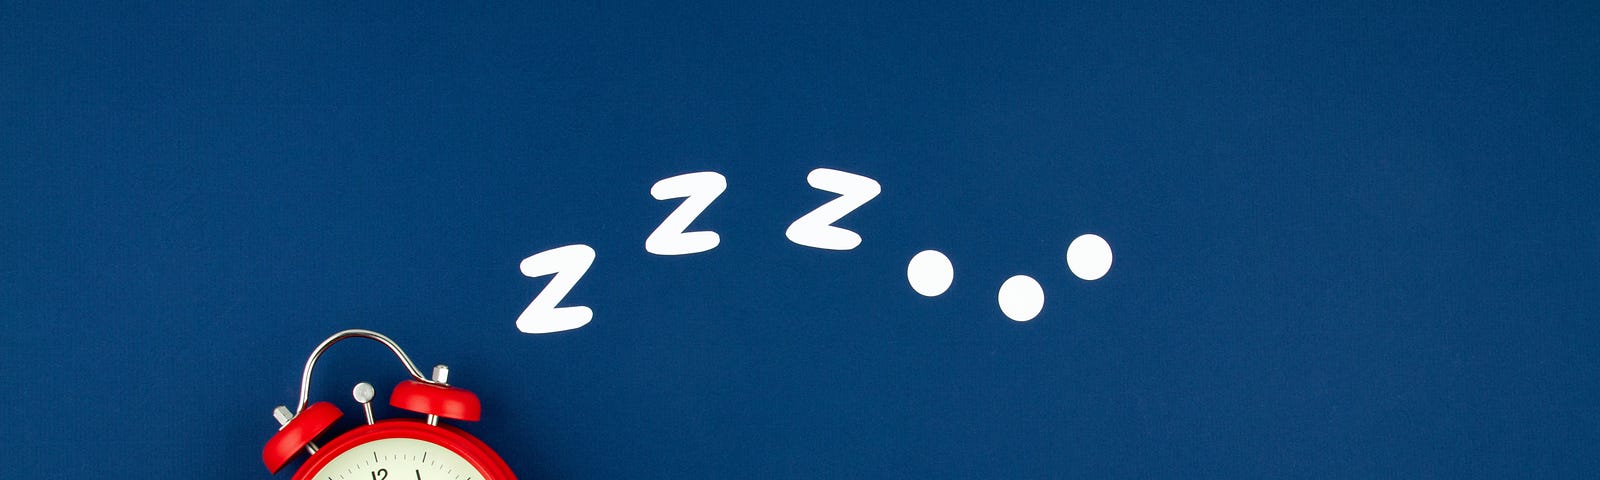 A cartoon image of a clock with zzz’s spilling from the top of it.